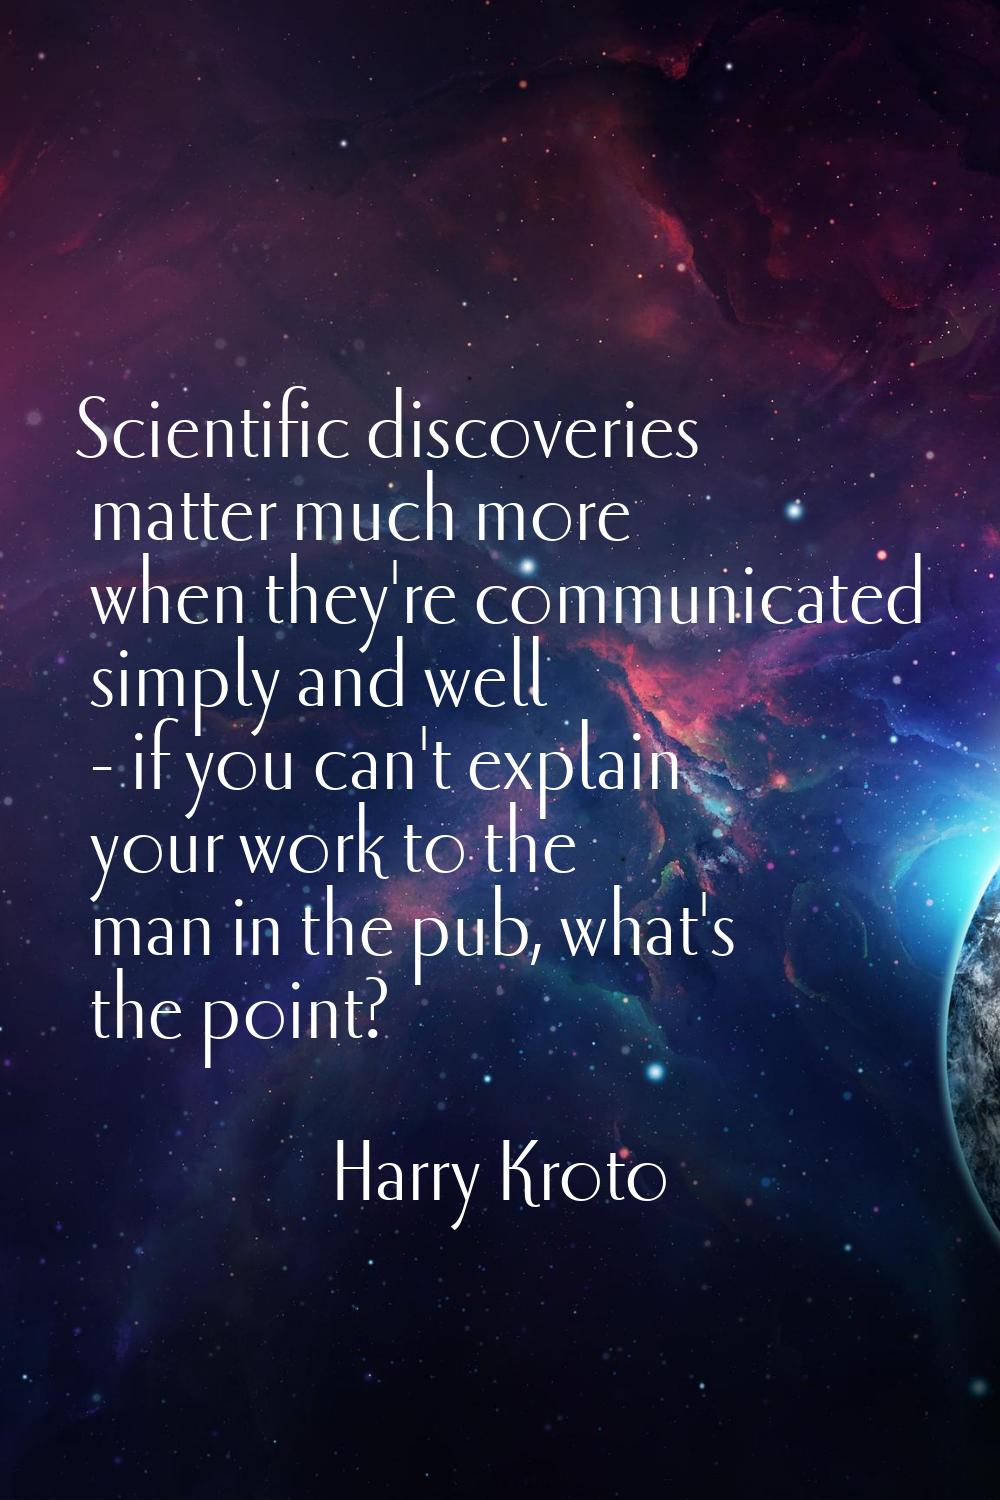 Scientific discoveries matter much more when they're communicated simply and well - if you can't ex